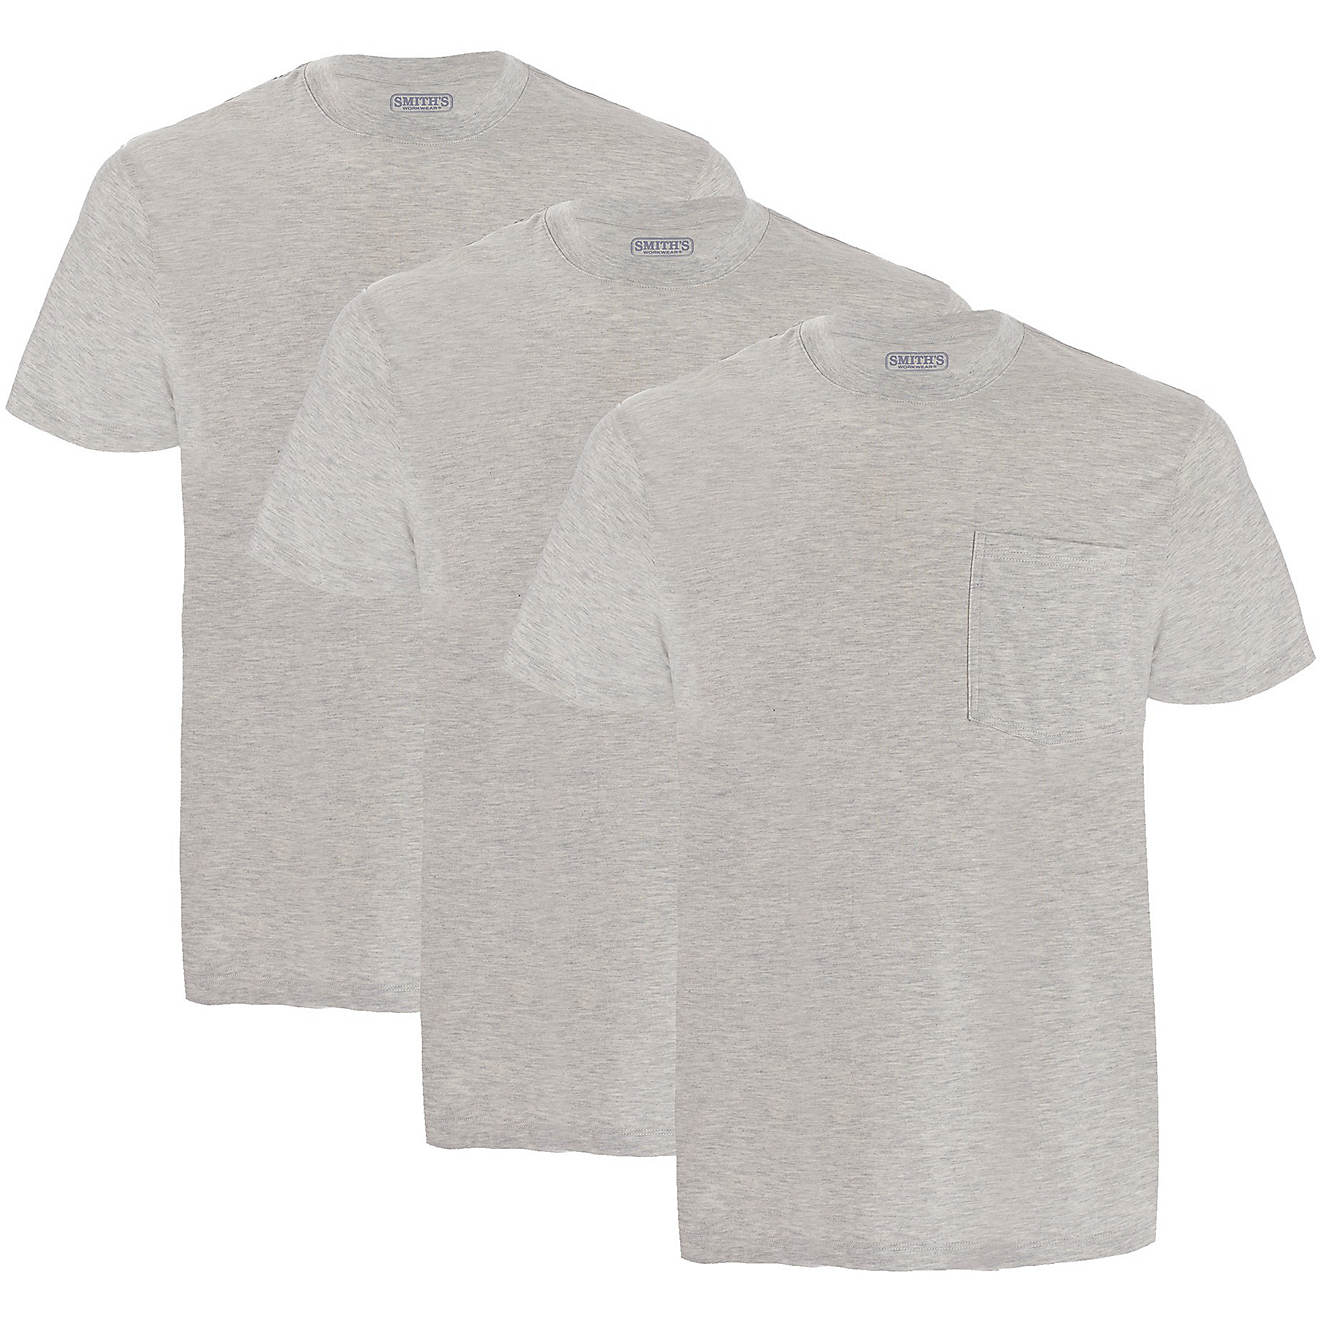 Smith's Workwear Men's Quick Dry Pocket T-shirts 3-Pack | Academy